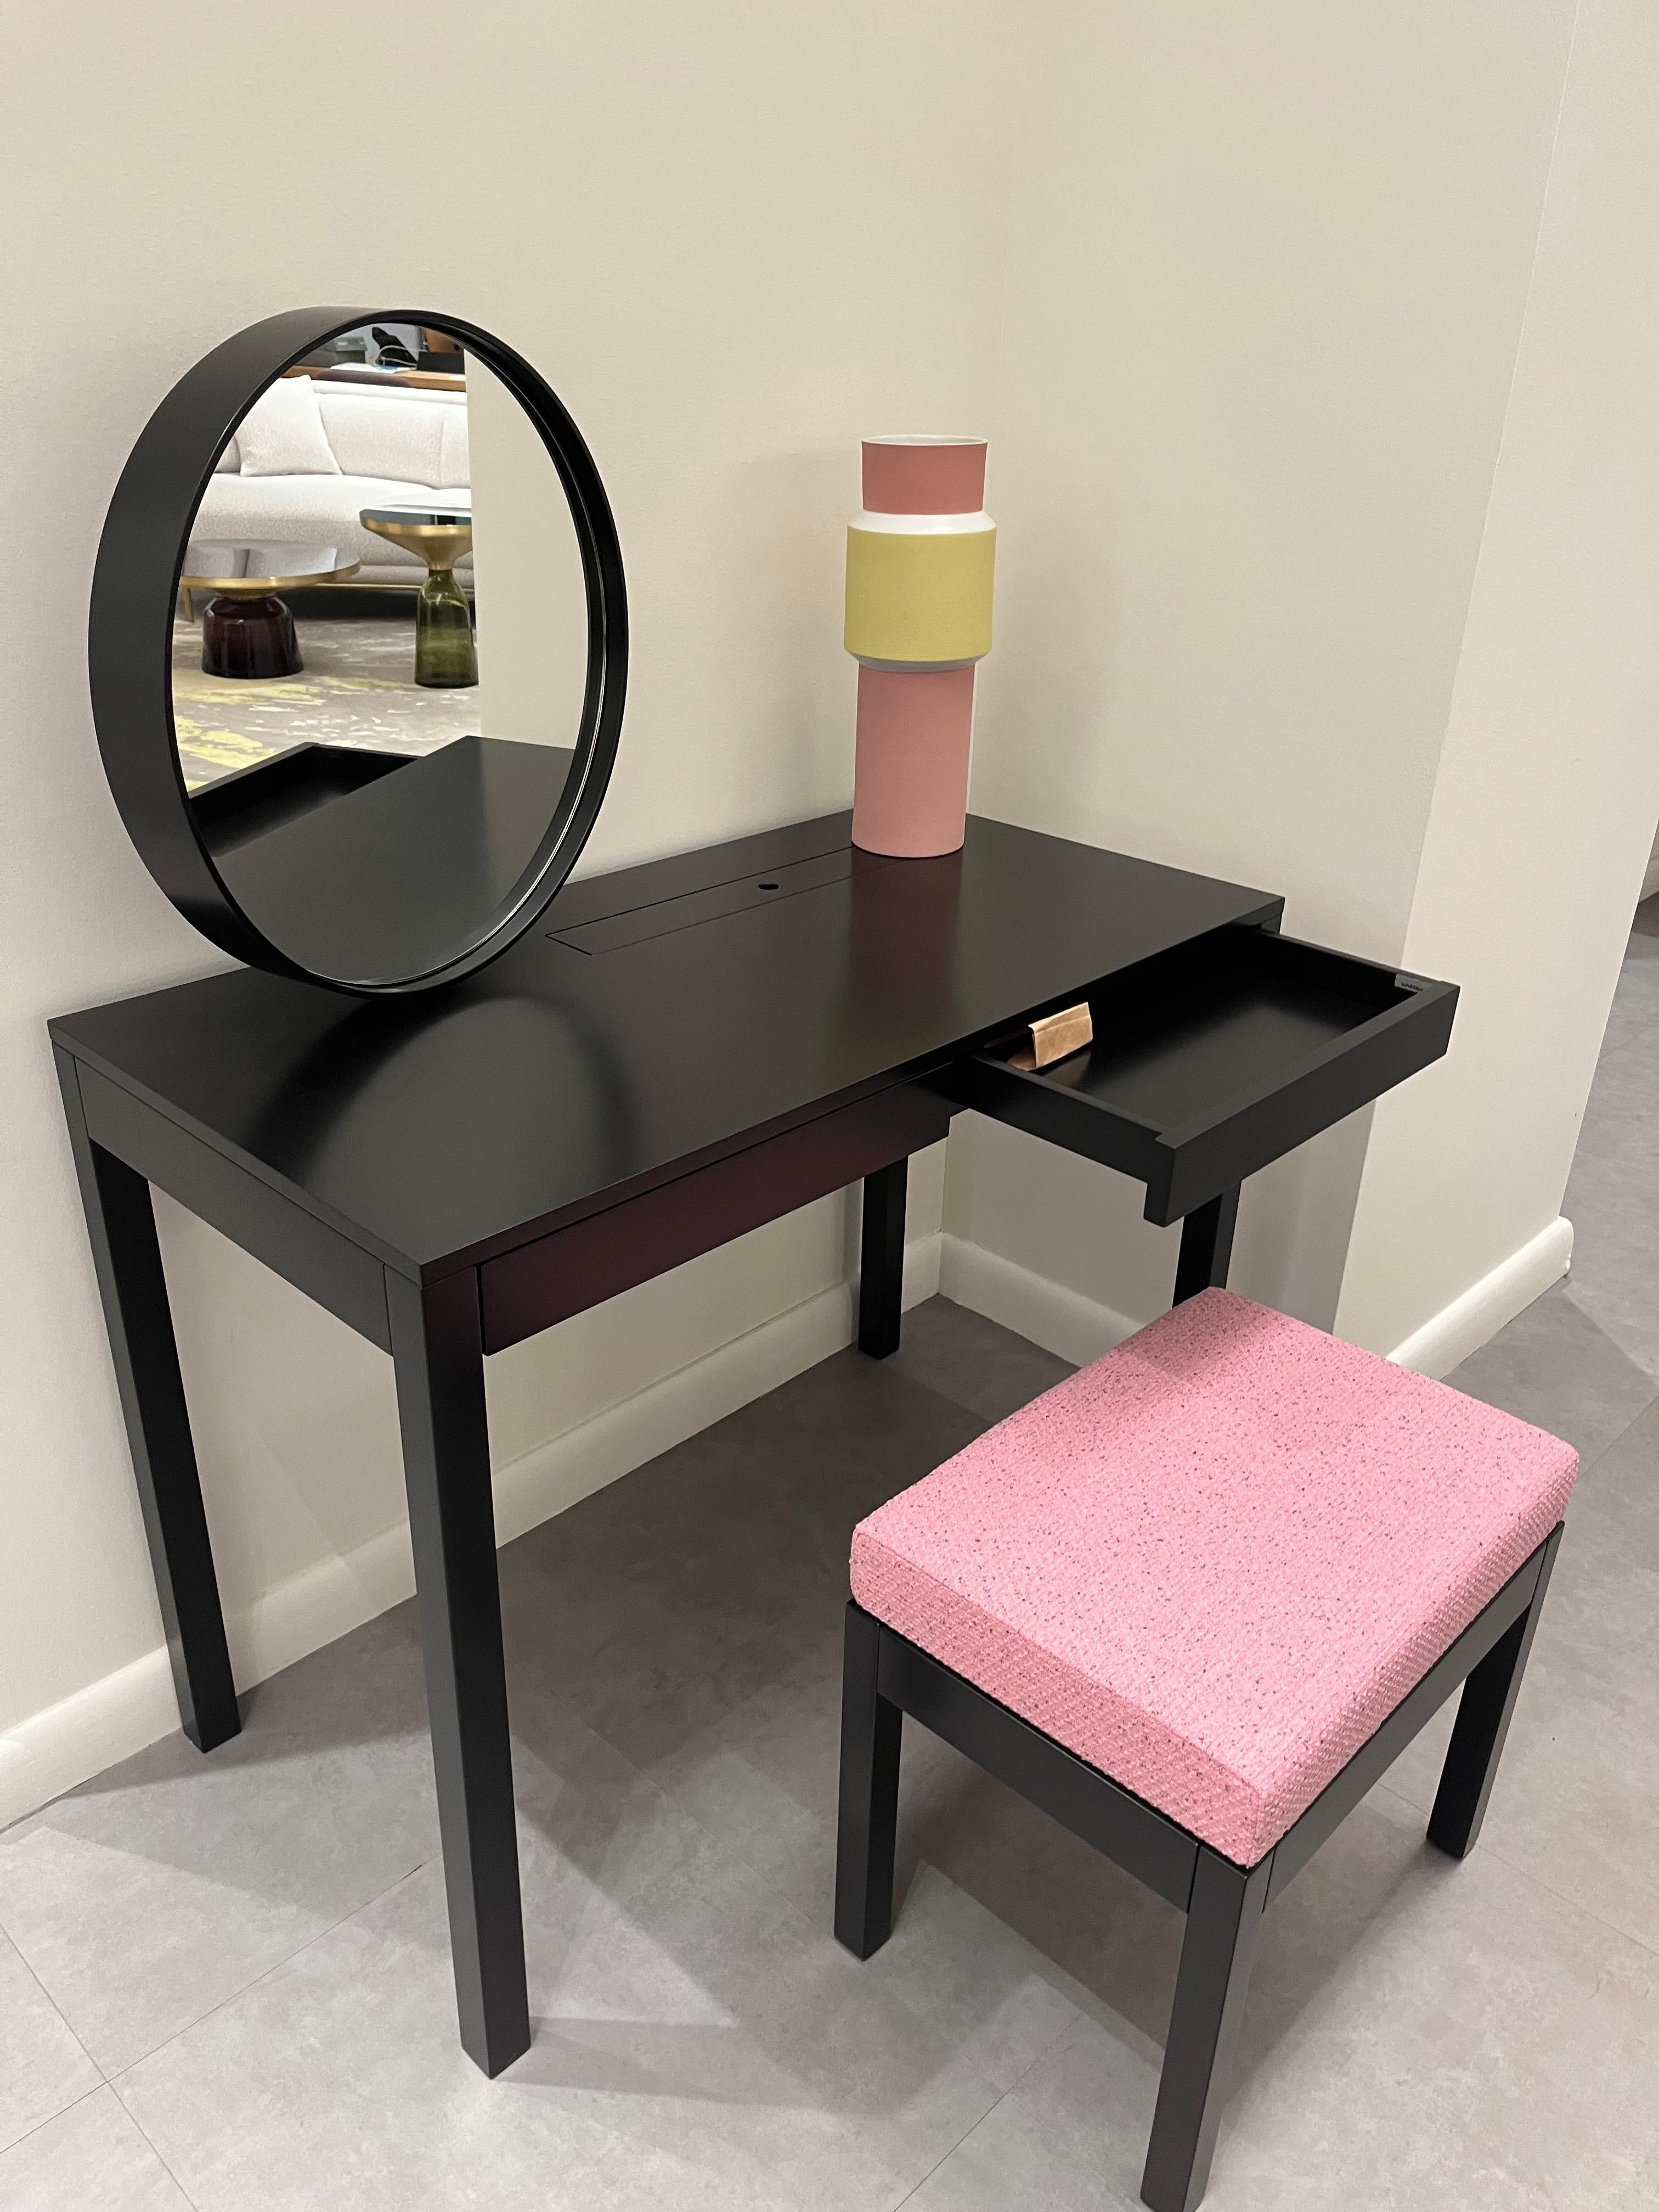 Schonbuch Sphere Make-up Table with mirror Designed by Martha Schwindling STOCK 1